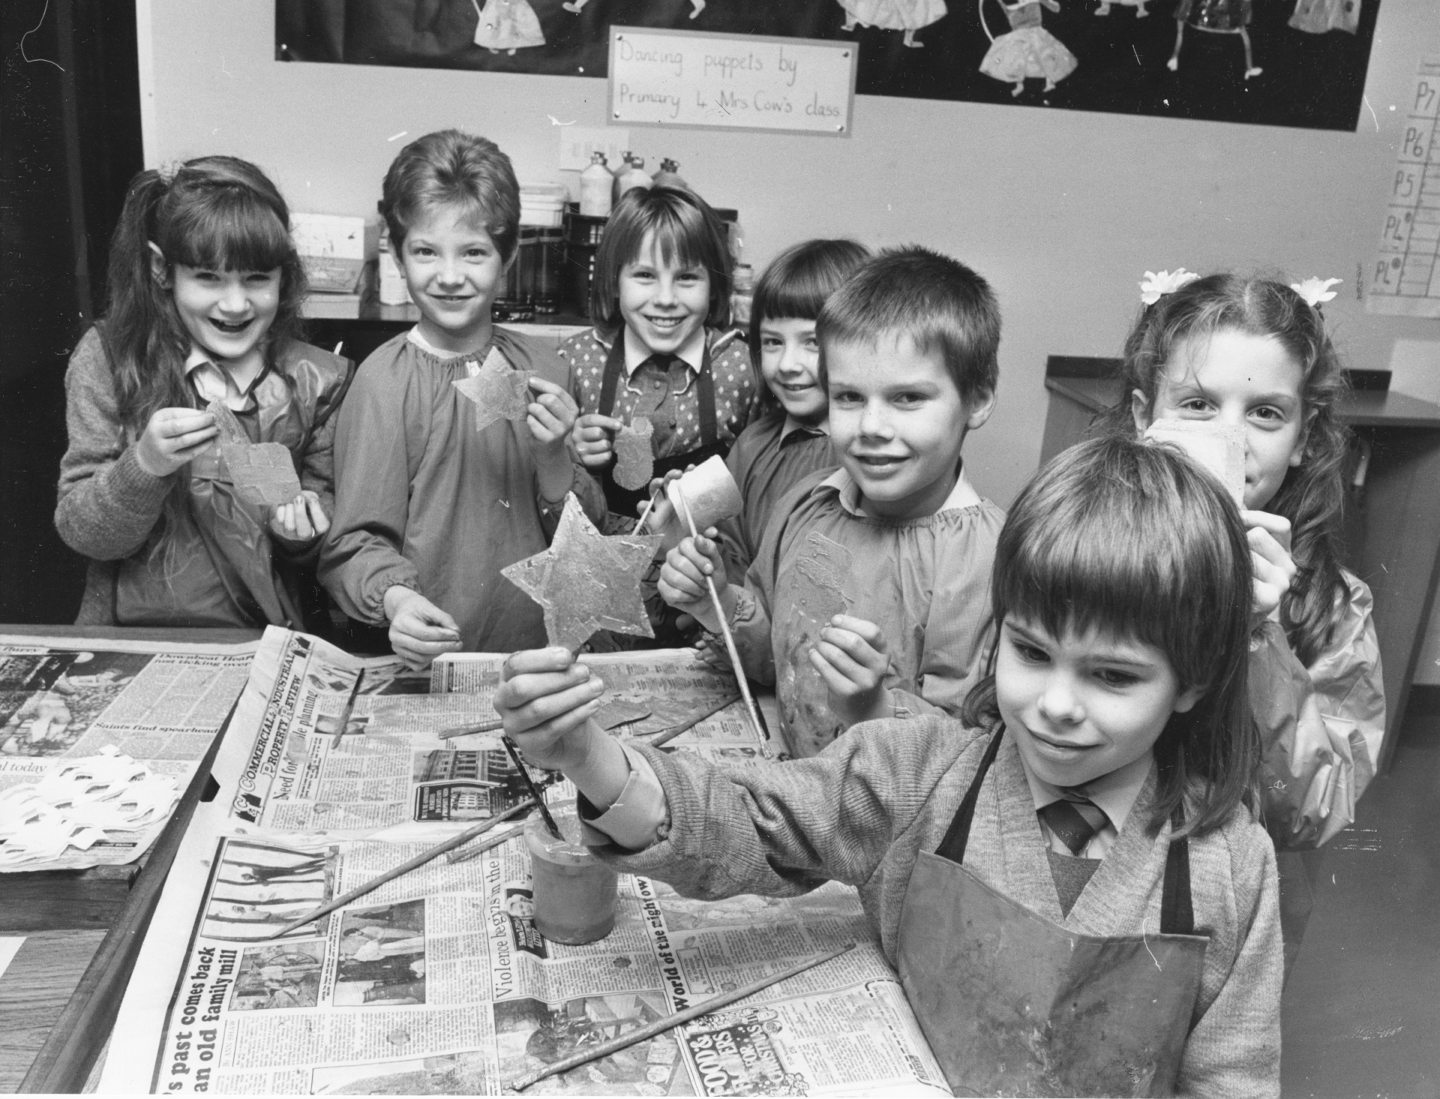 Primary 4/5 class pupils at Danestone producing star gift tags for their Christmas presents in 1987.